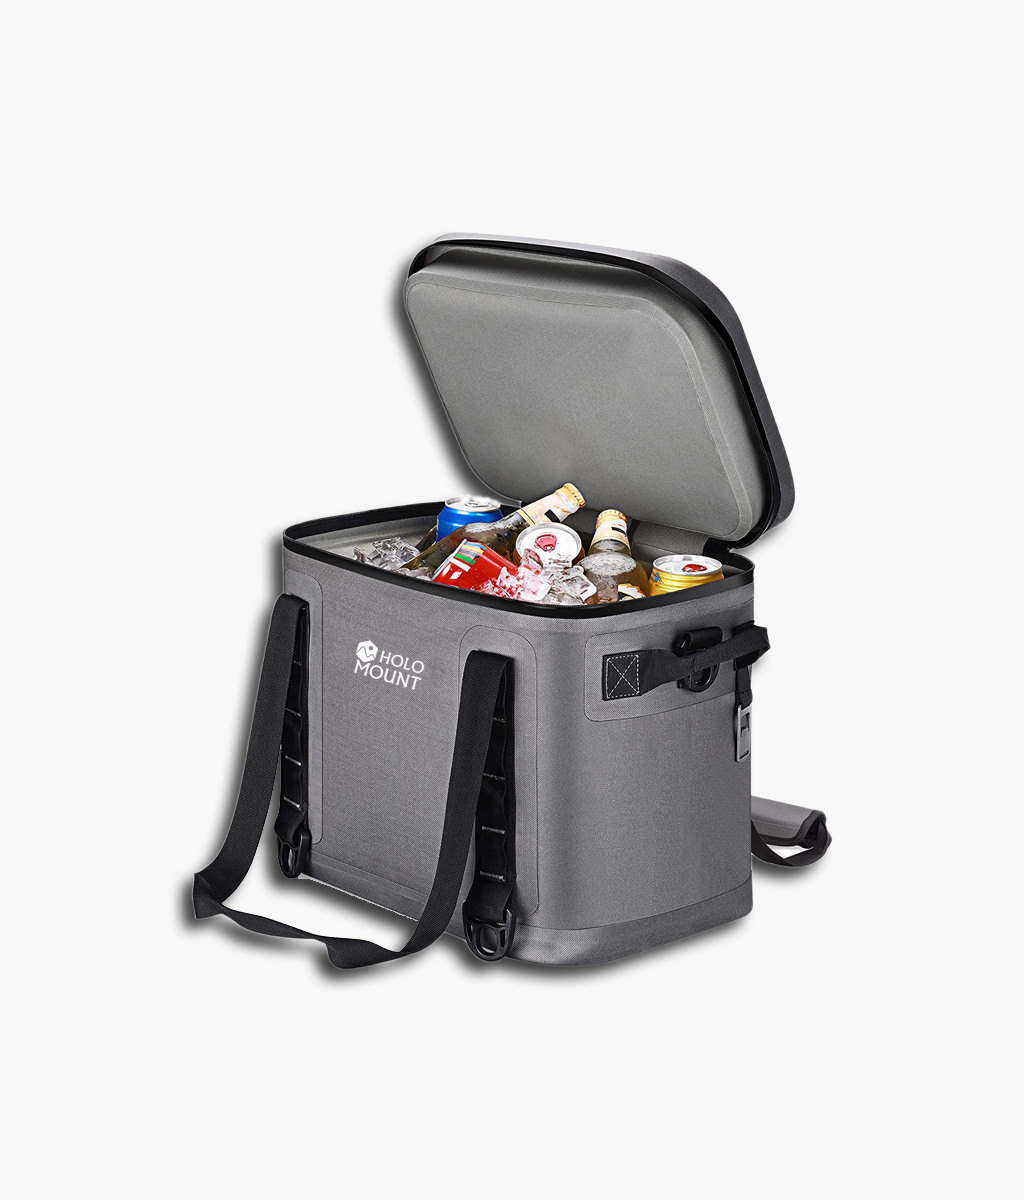 China Insulated Cooler Leakproof Soft Cooler Bag Men Women to Picnic,  Hiking, Fishing, Camping Manufacture and Factory